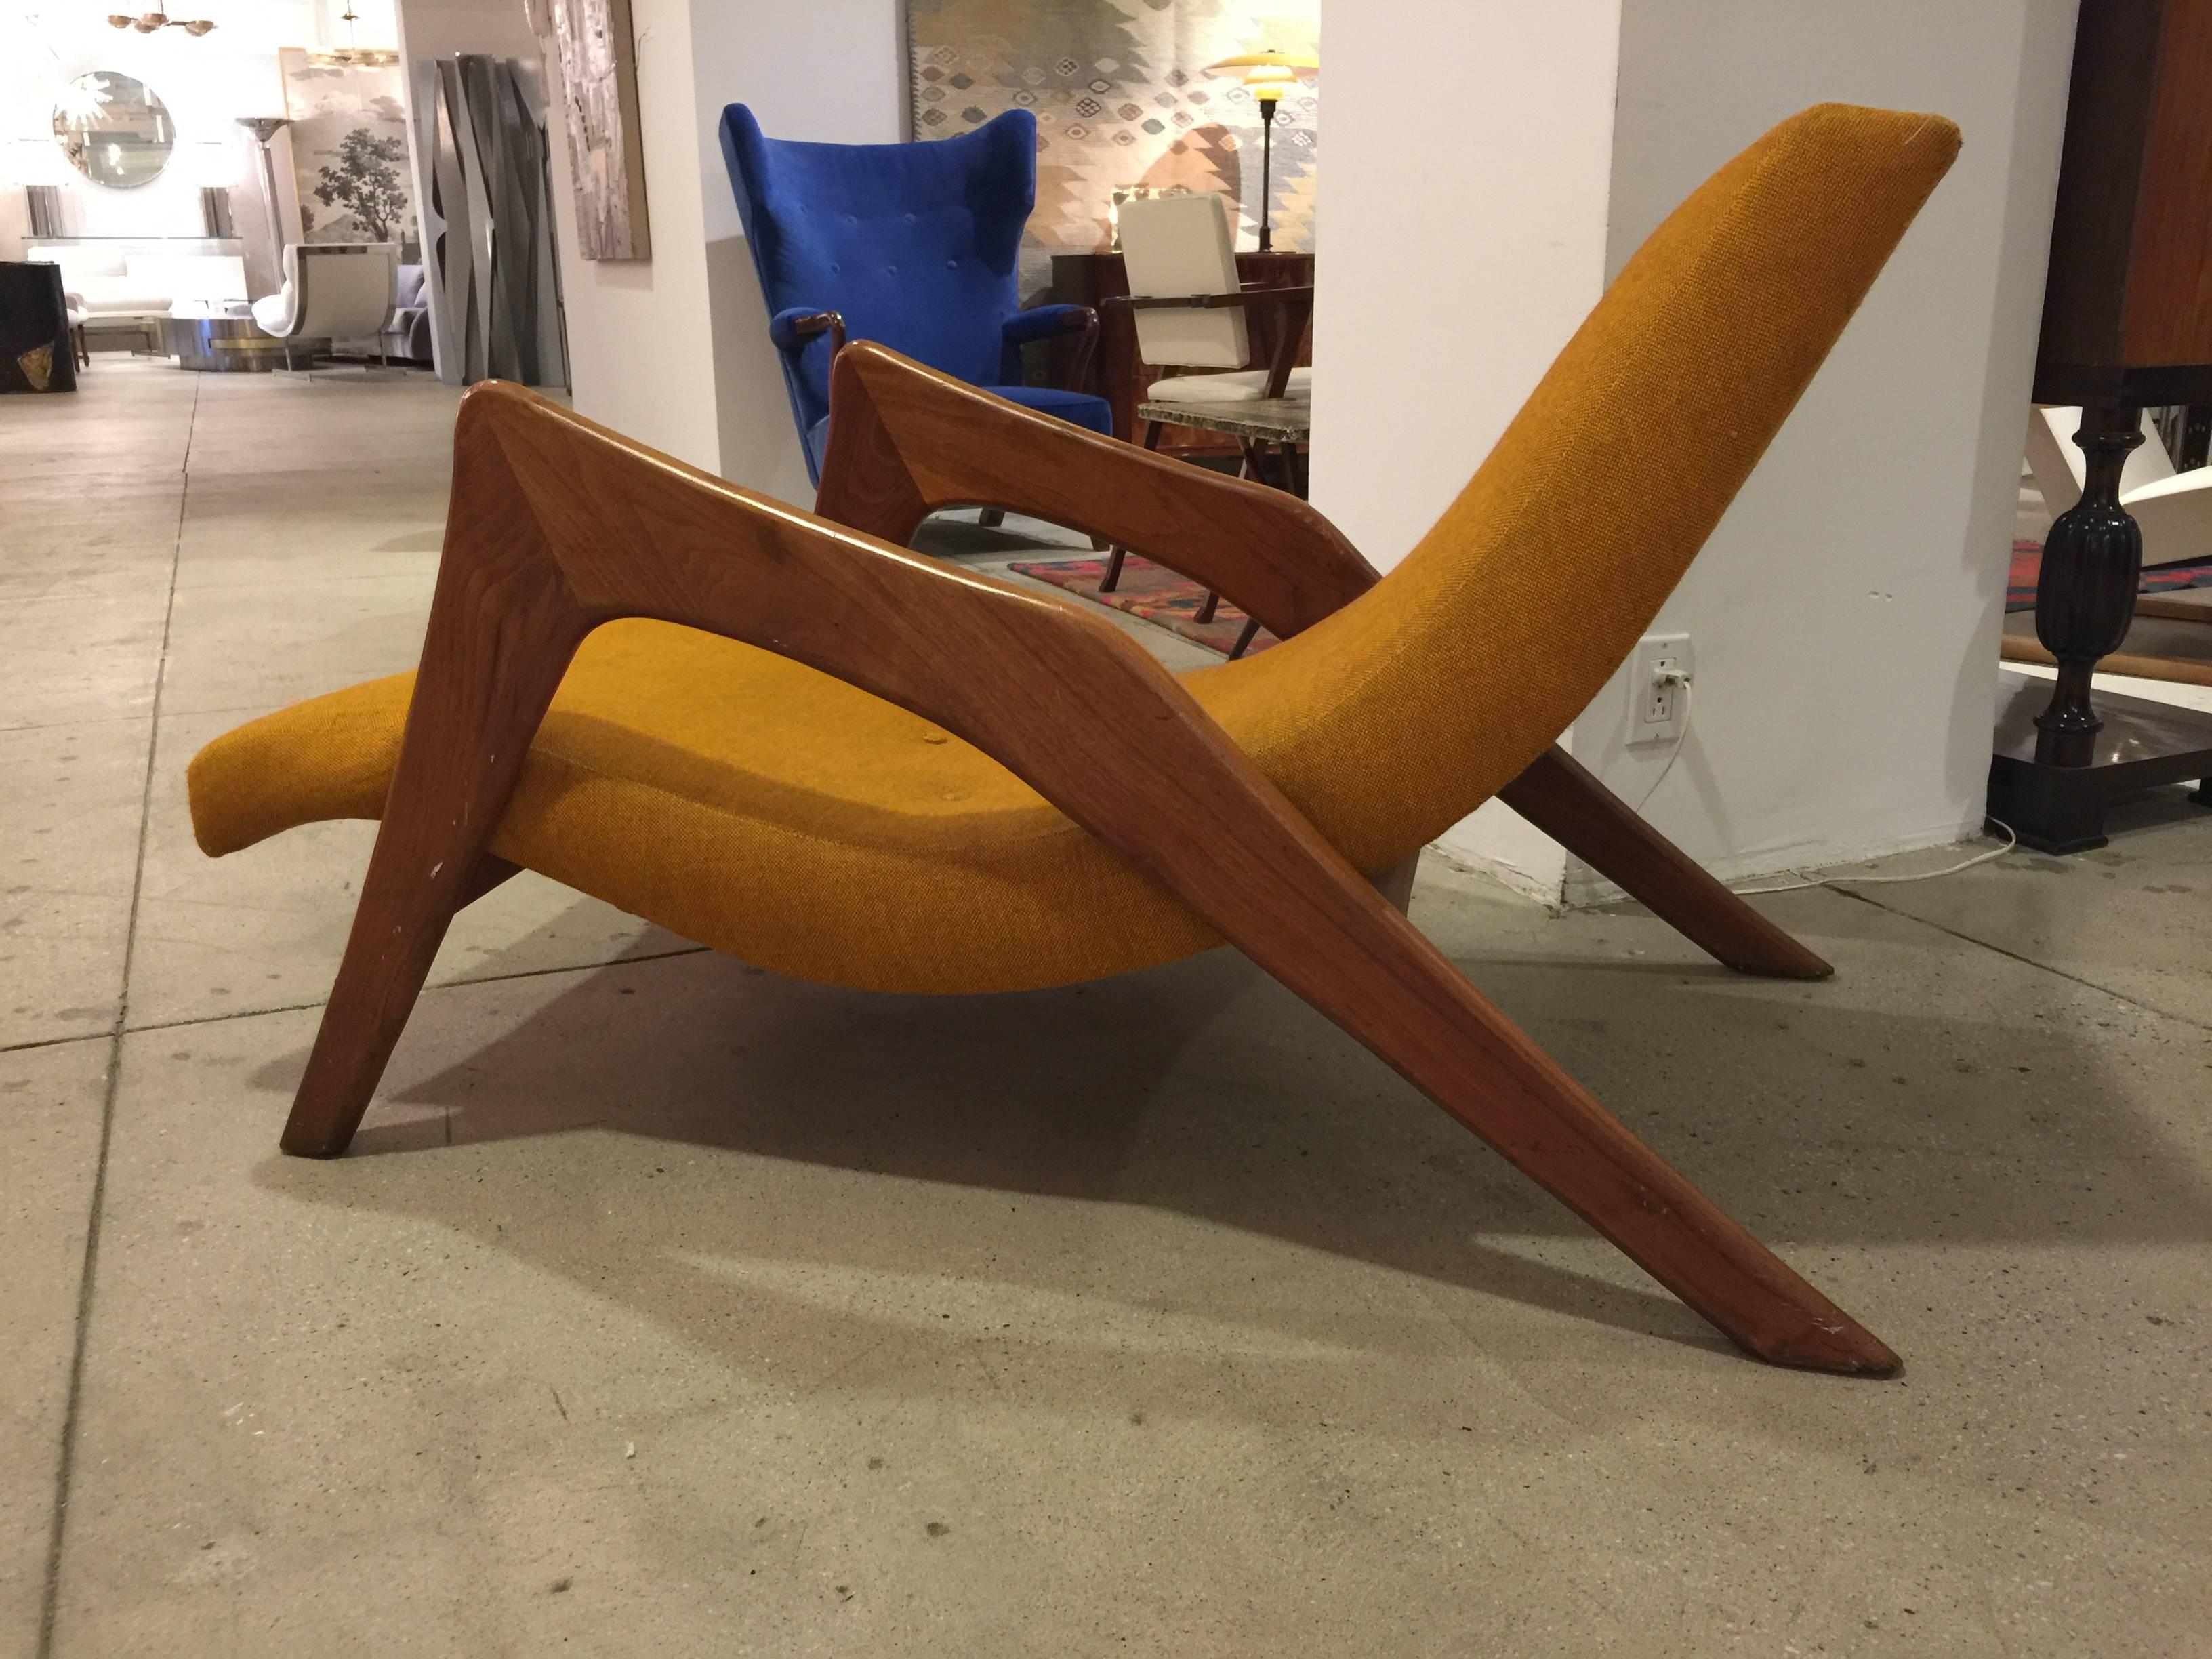 Rare and unusual Crescent lounge chair by Adrian Pearsall.
Chair measures:
Height 29